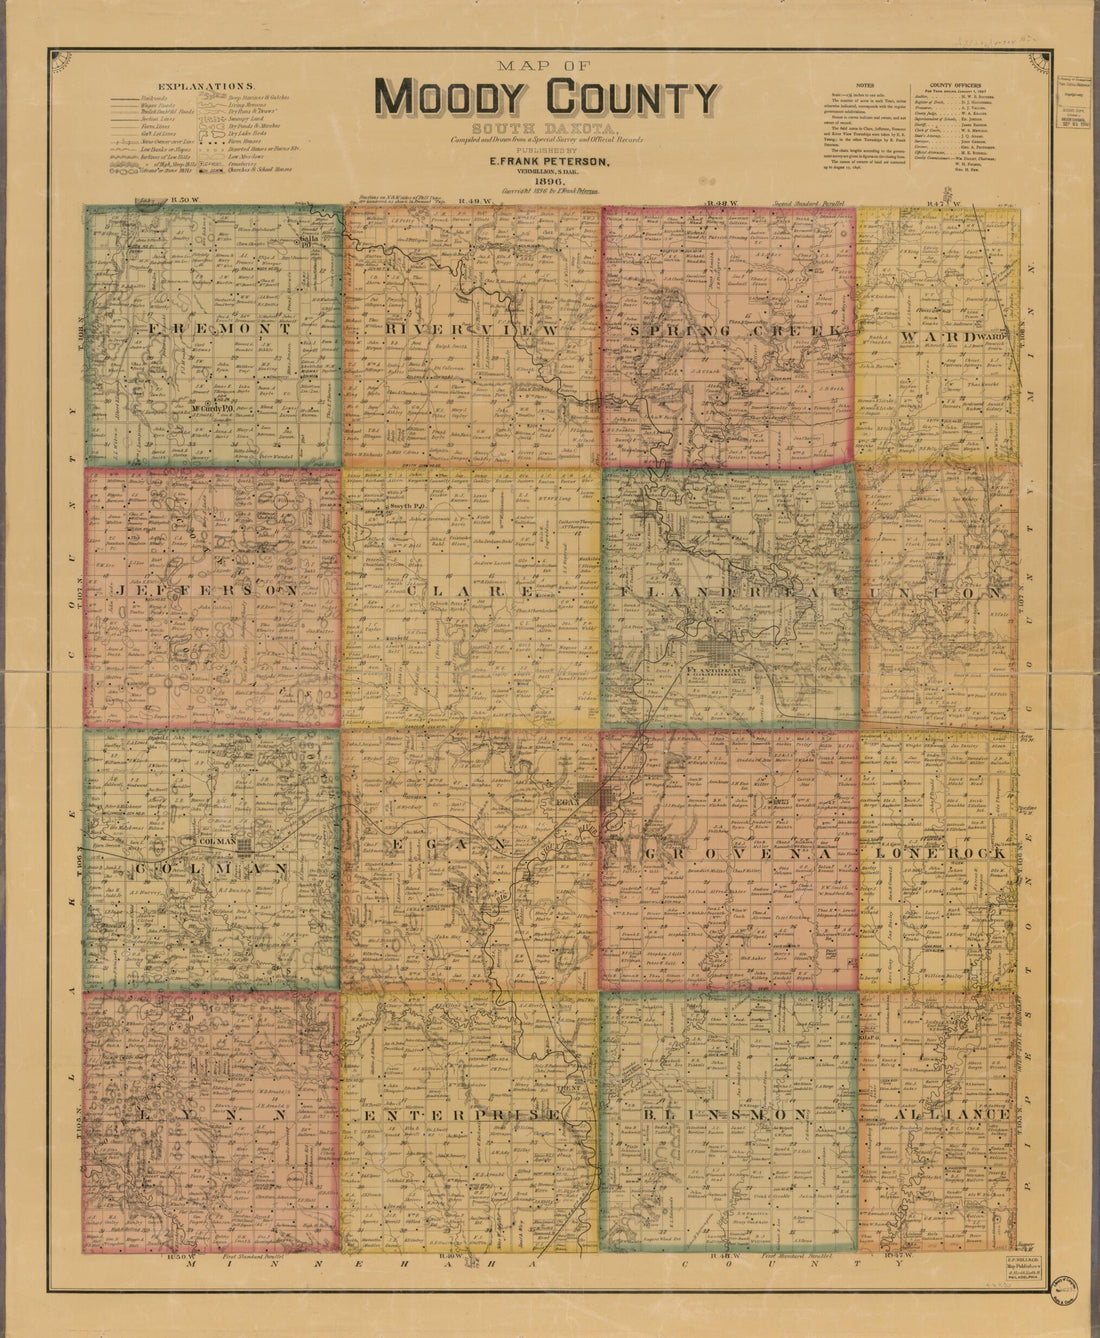 This old map of Map of Moody County, South Dakota : Compiled and Drawn from a Special Survey and Official Records from 1896 was created by E. Frank Peterson in 1896